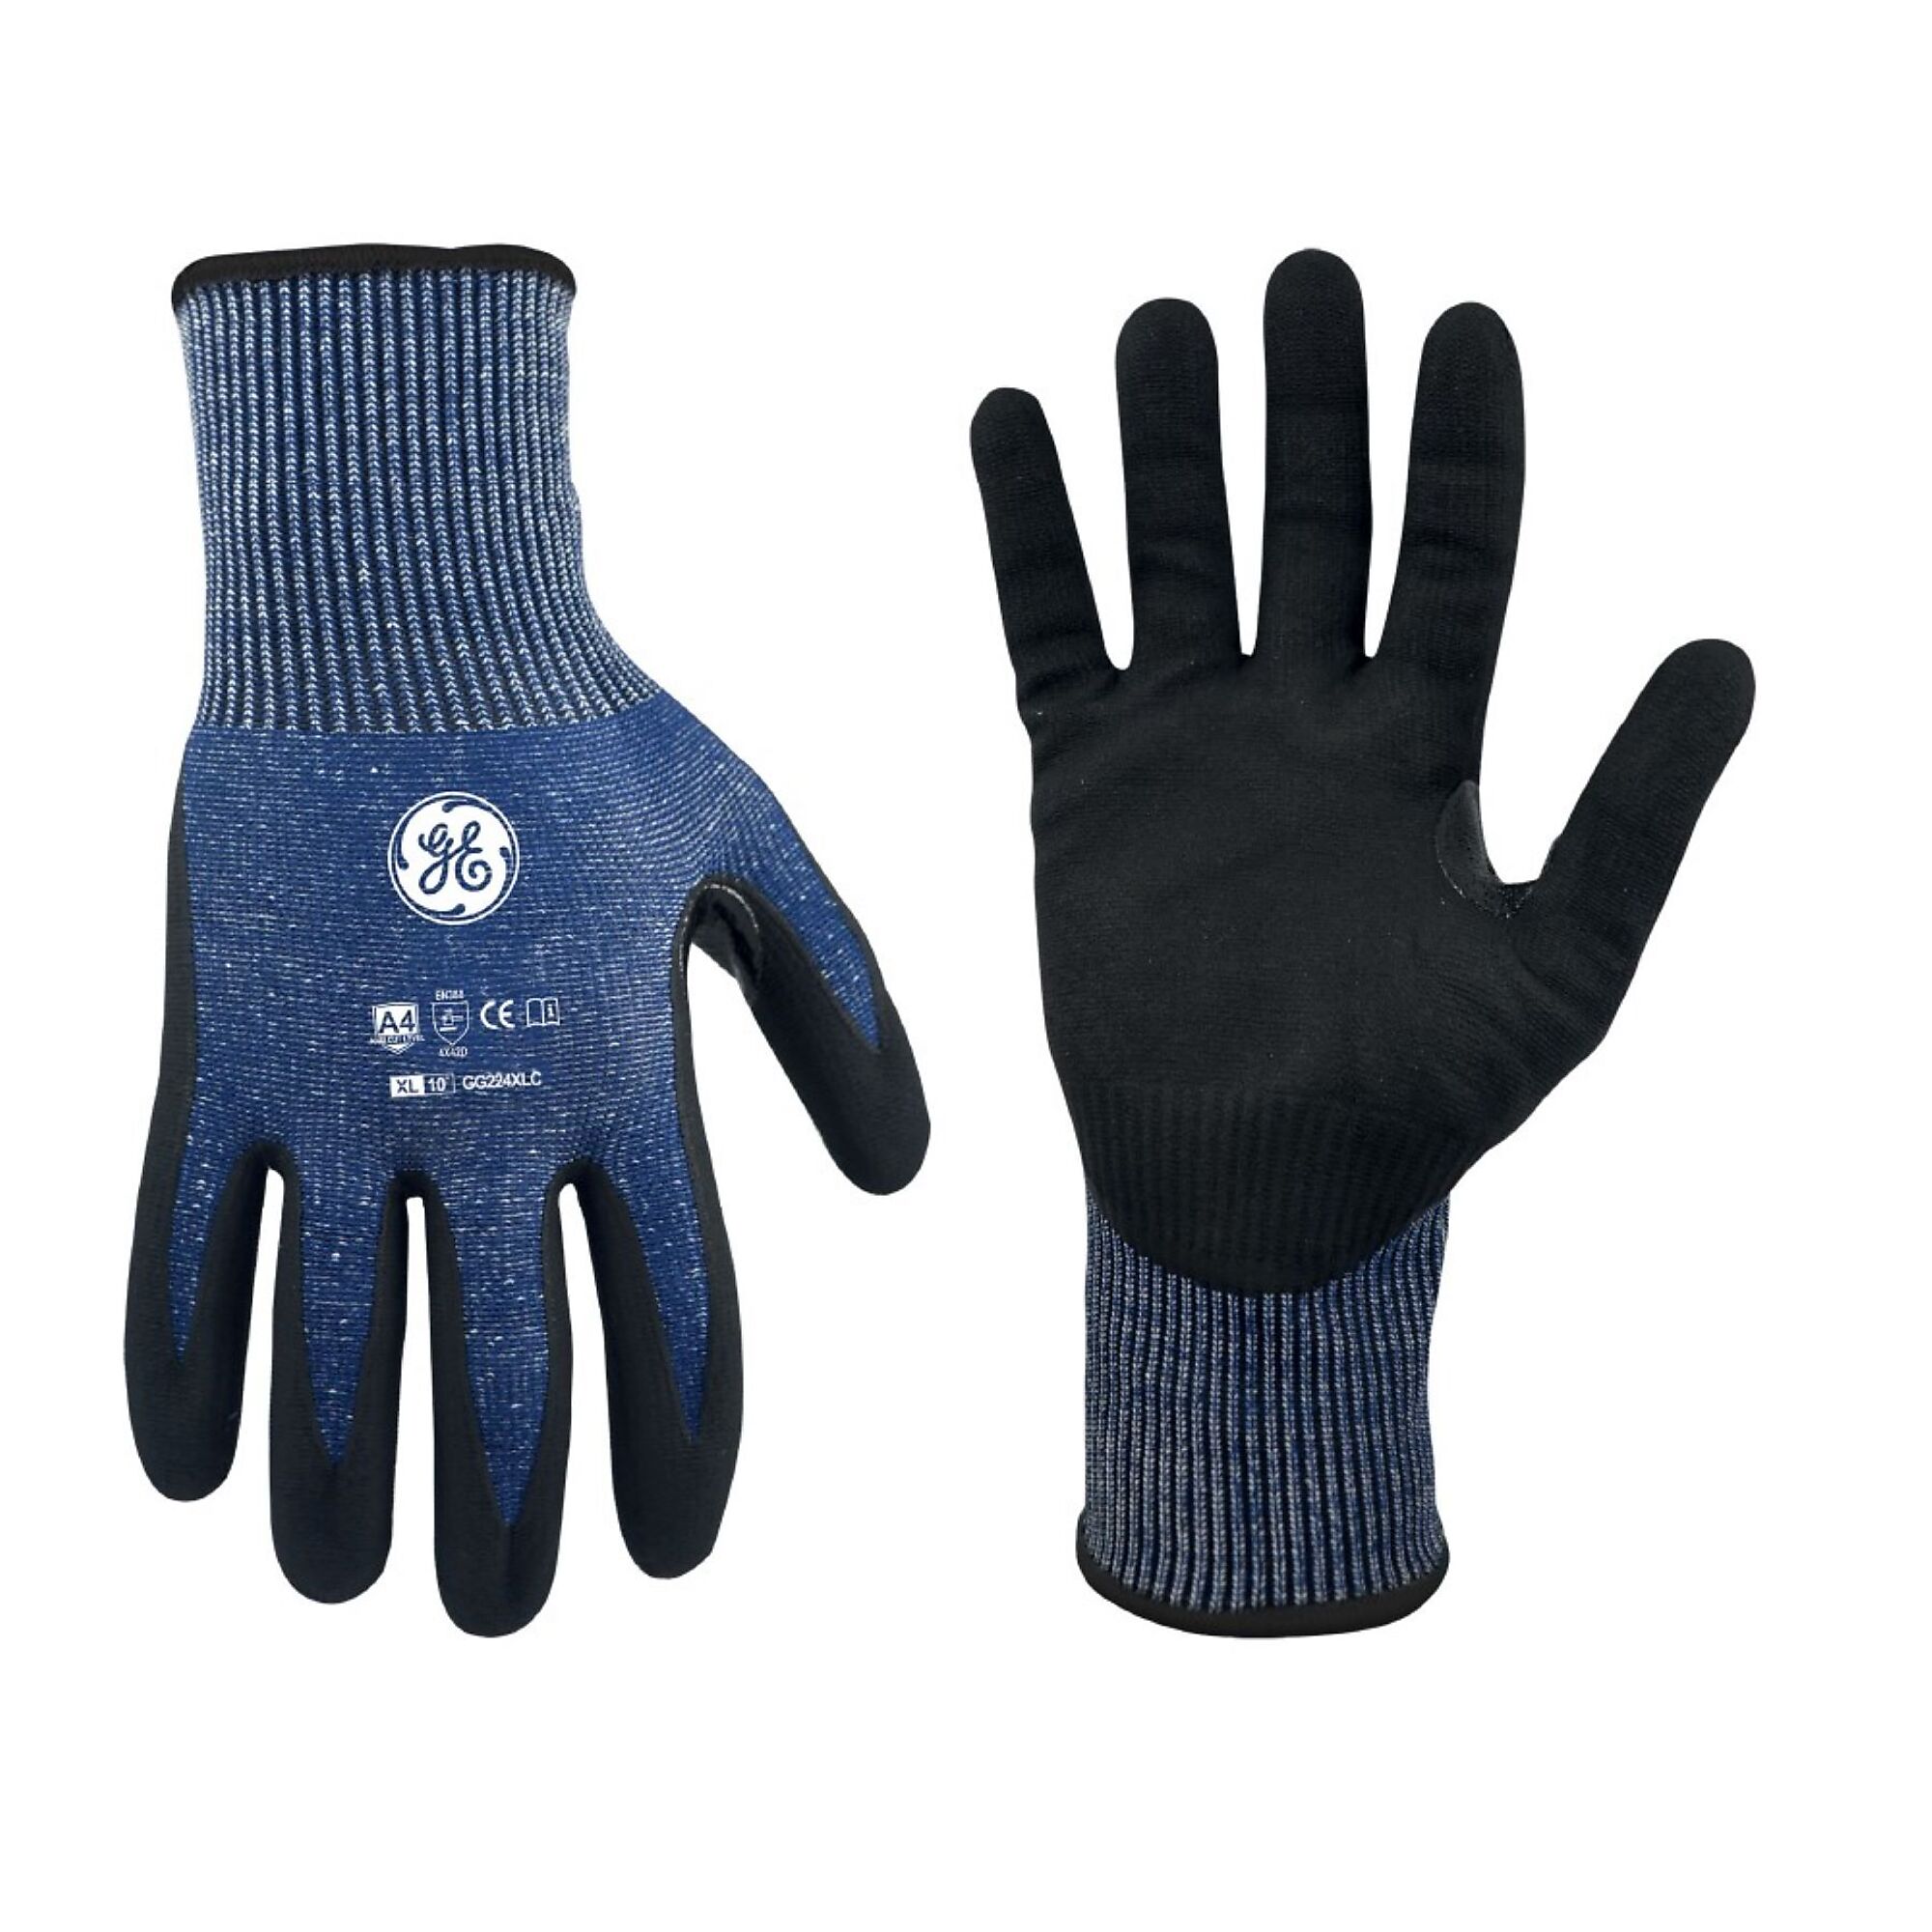 General Electric, Unisex Dipped Gloves Black/Blue XL 12 pair, Size XL, Included (qty.) 12, Model GG224XL